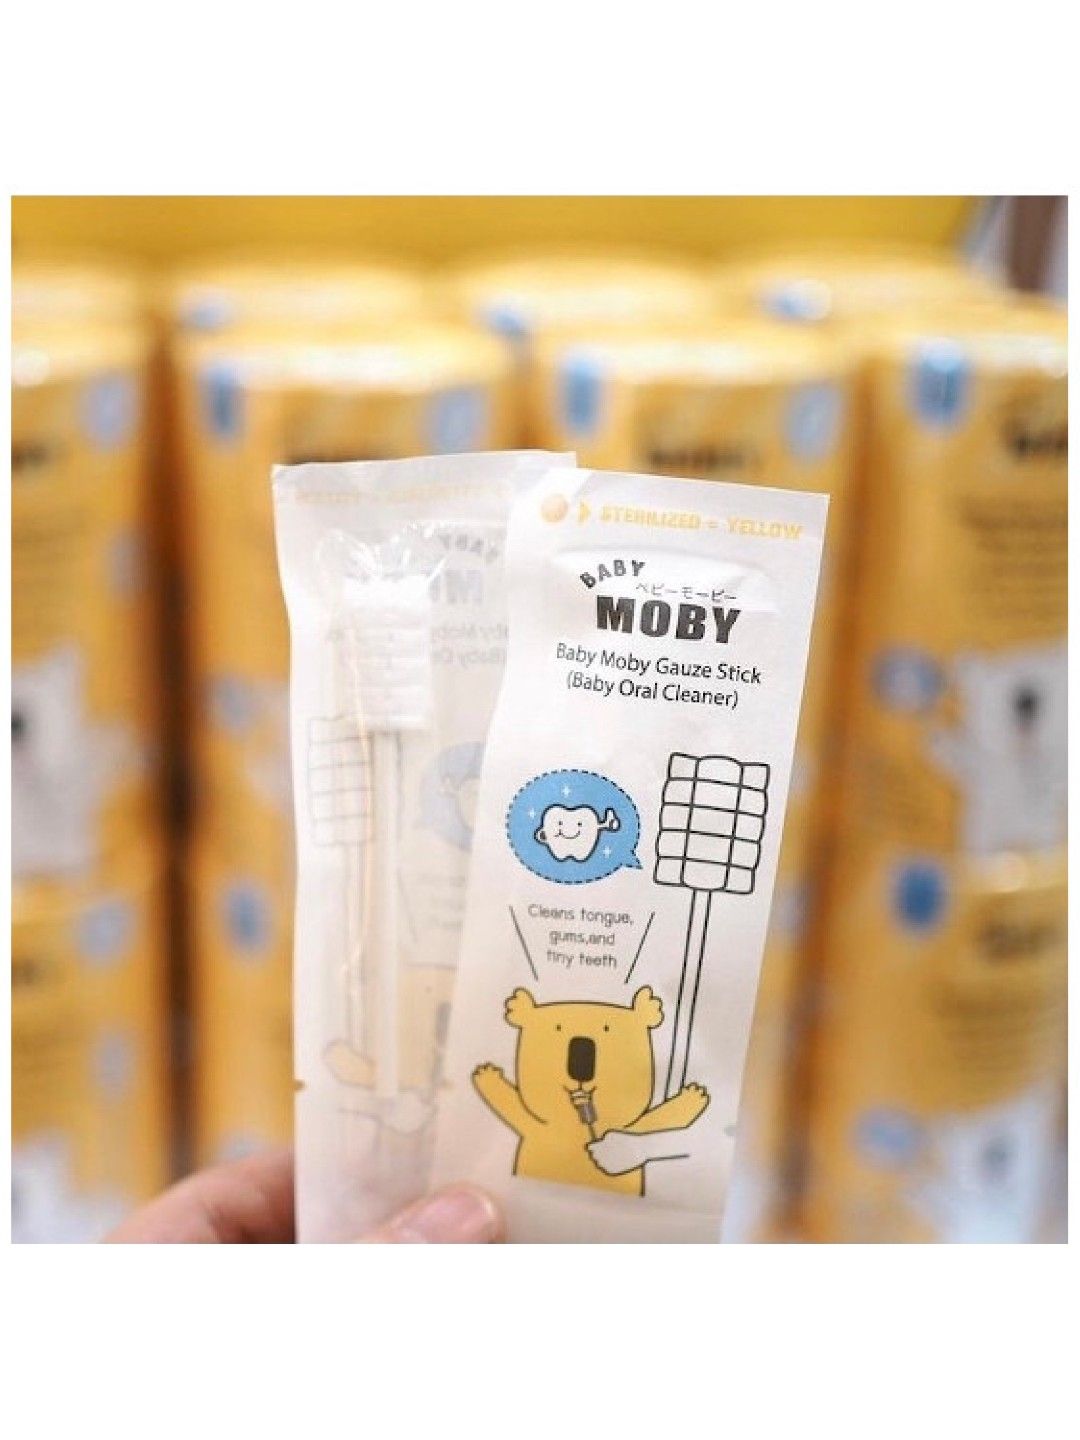 Baby Moby Gauze Stick (Baby Oral Cleaner) (No Color- Image 3)